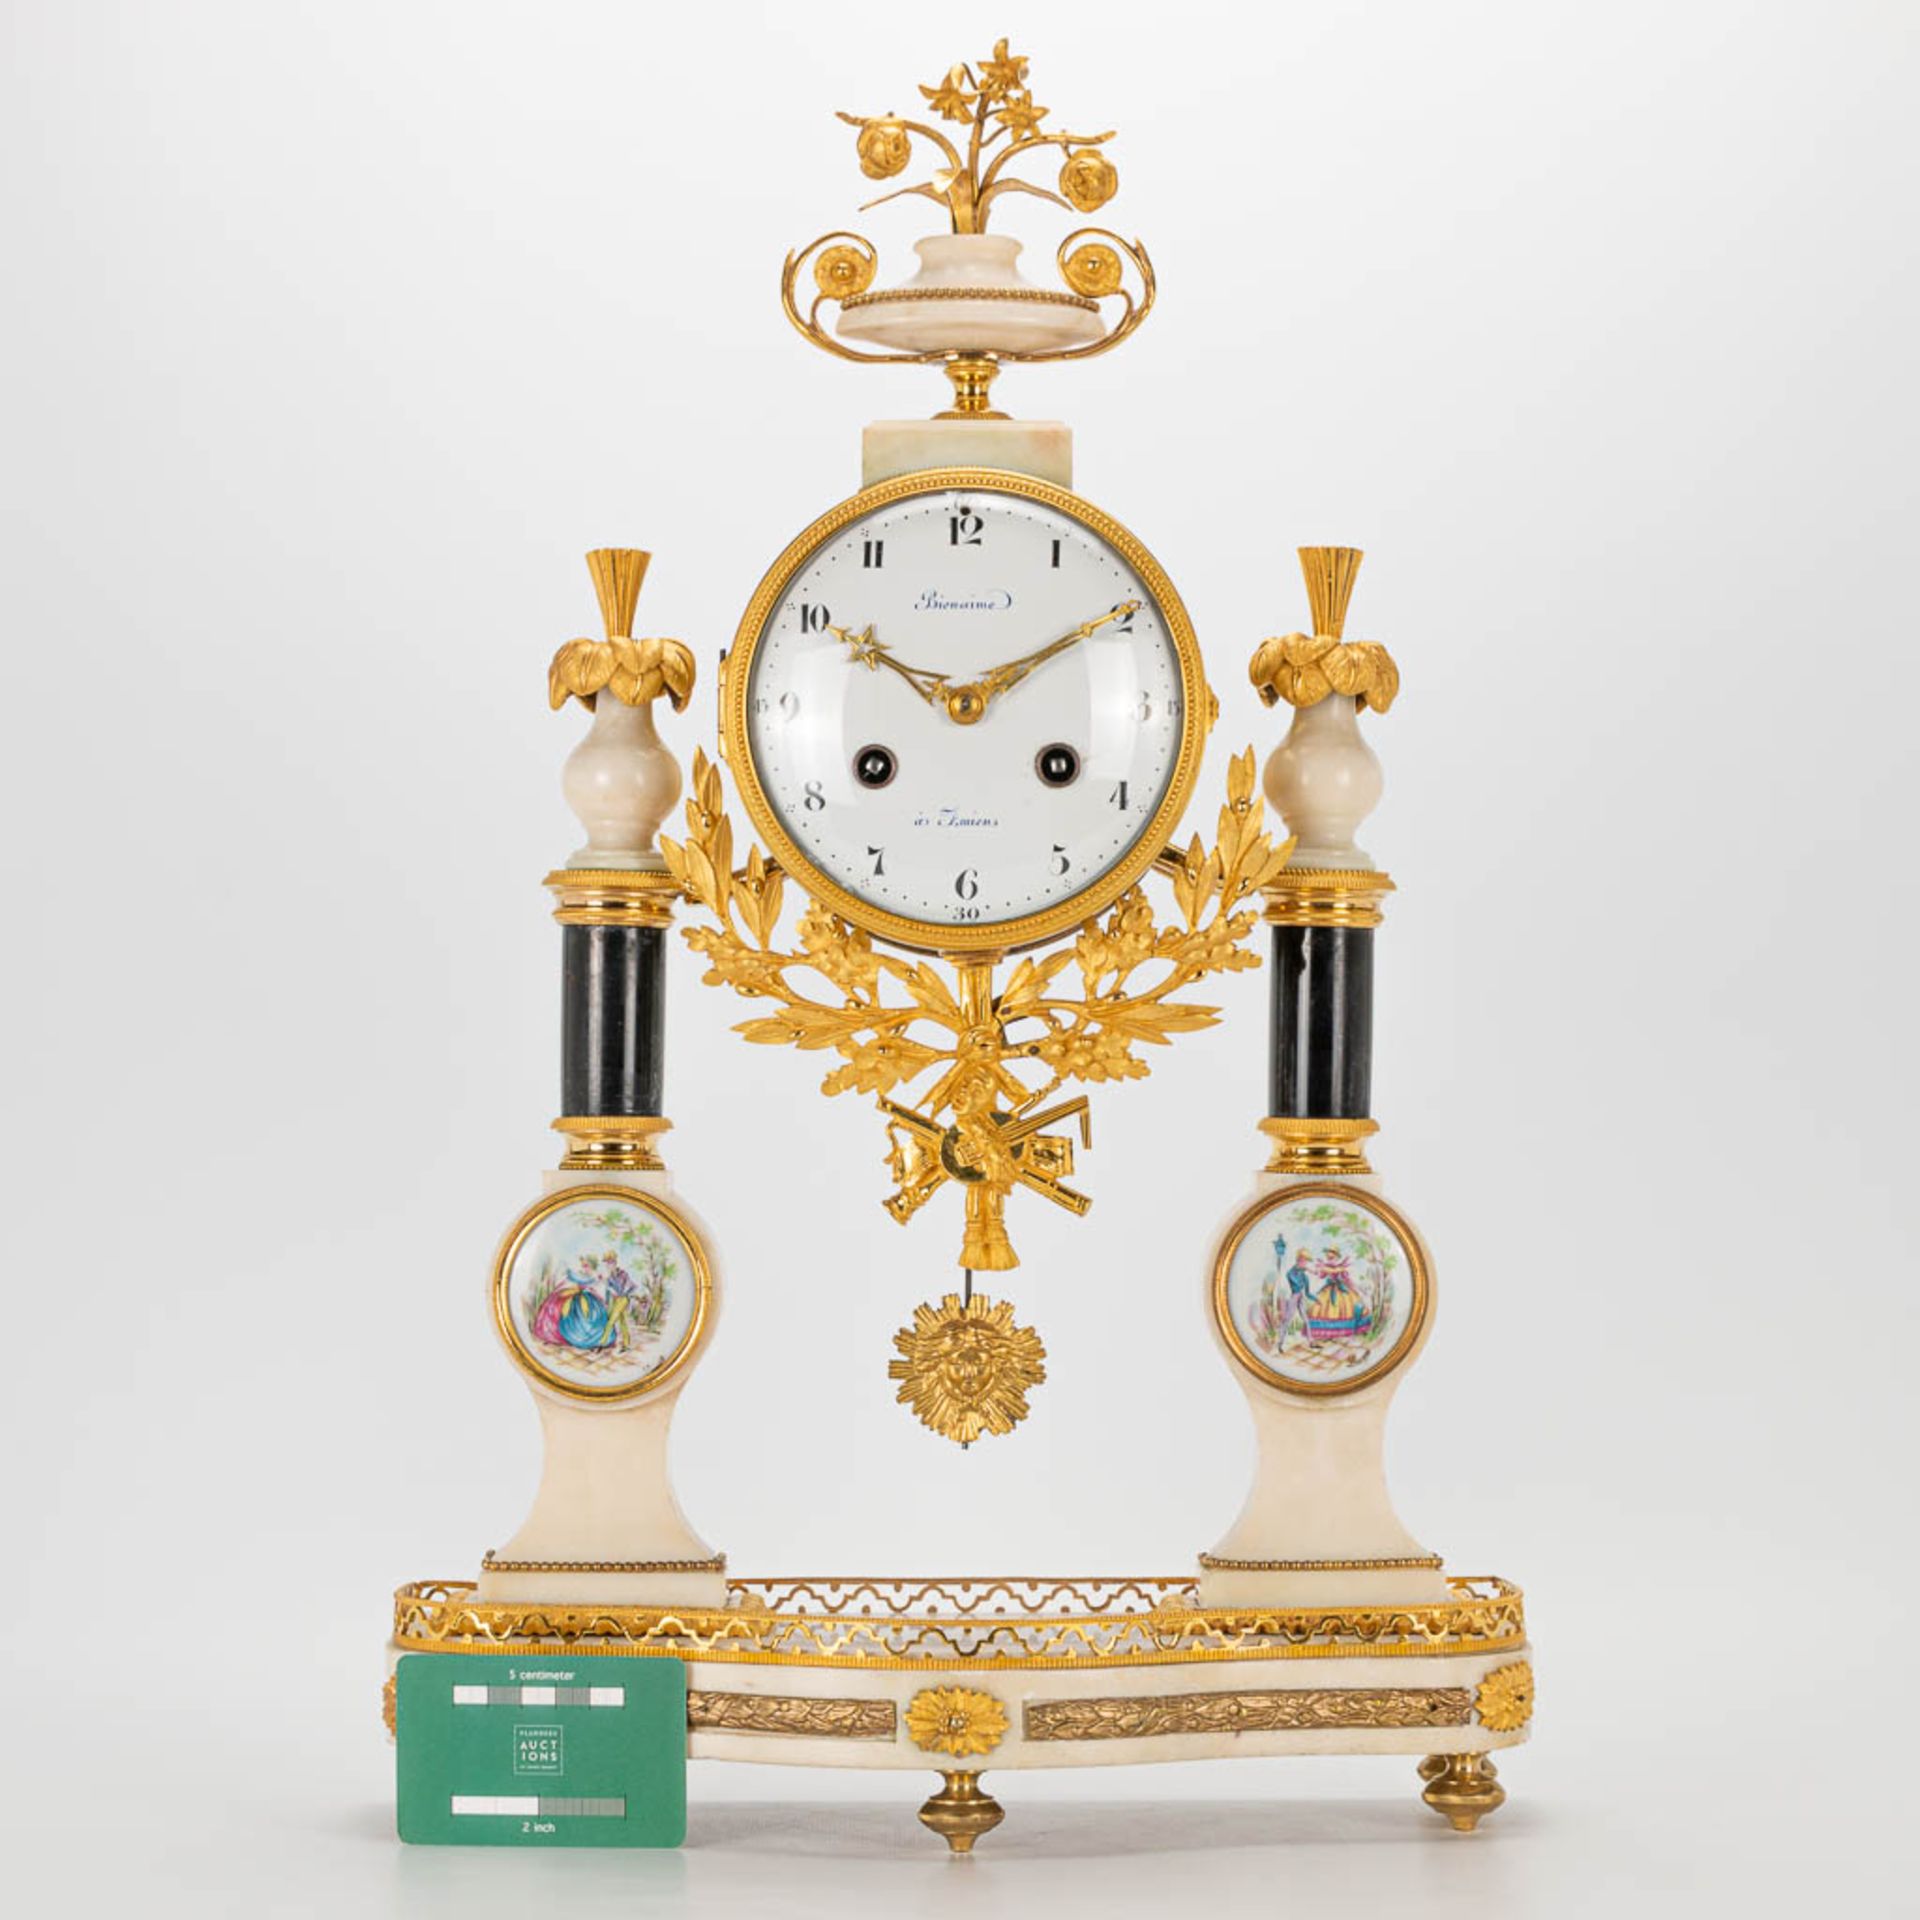 A Louis XVI style column clock made of bronze and marble, with handpainted Limoges plaques and marke - Image 4 of 23